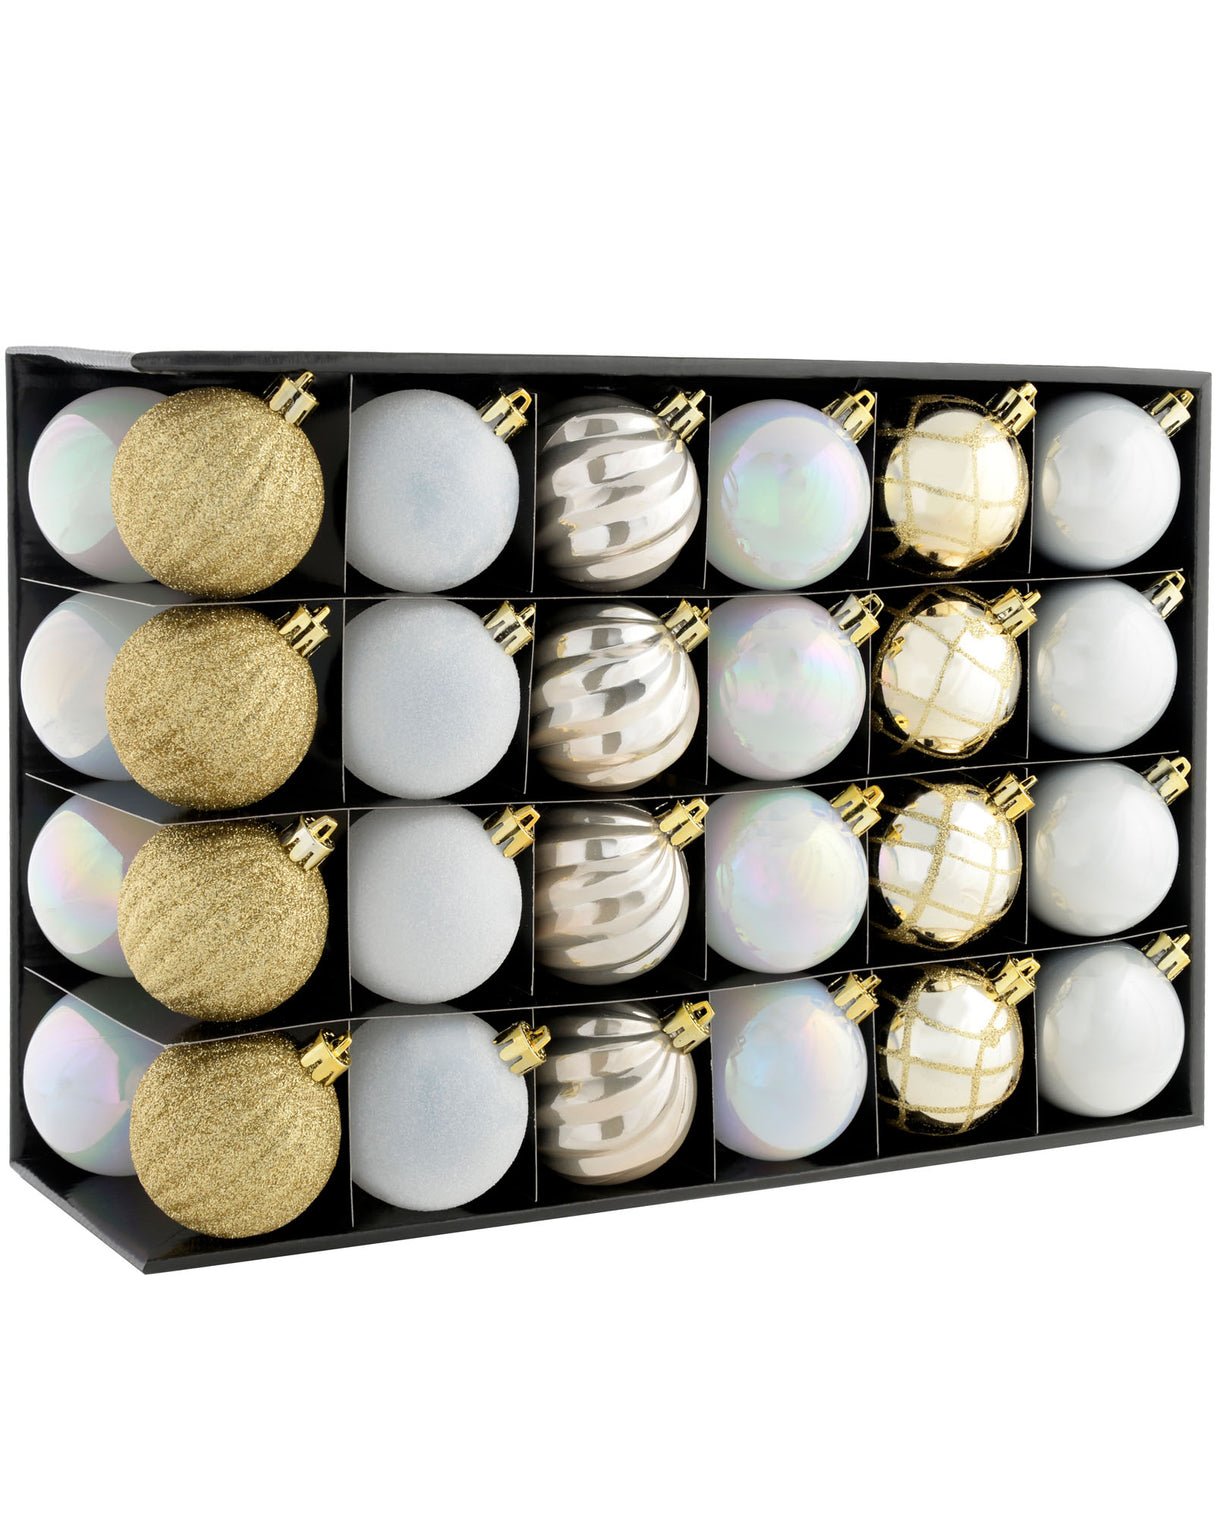 White/Gold Shatterproof Baubles, 48 Pack